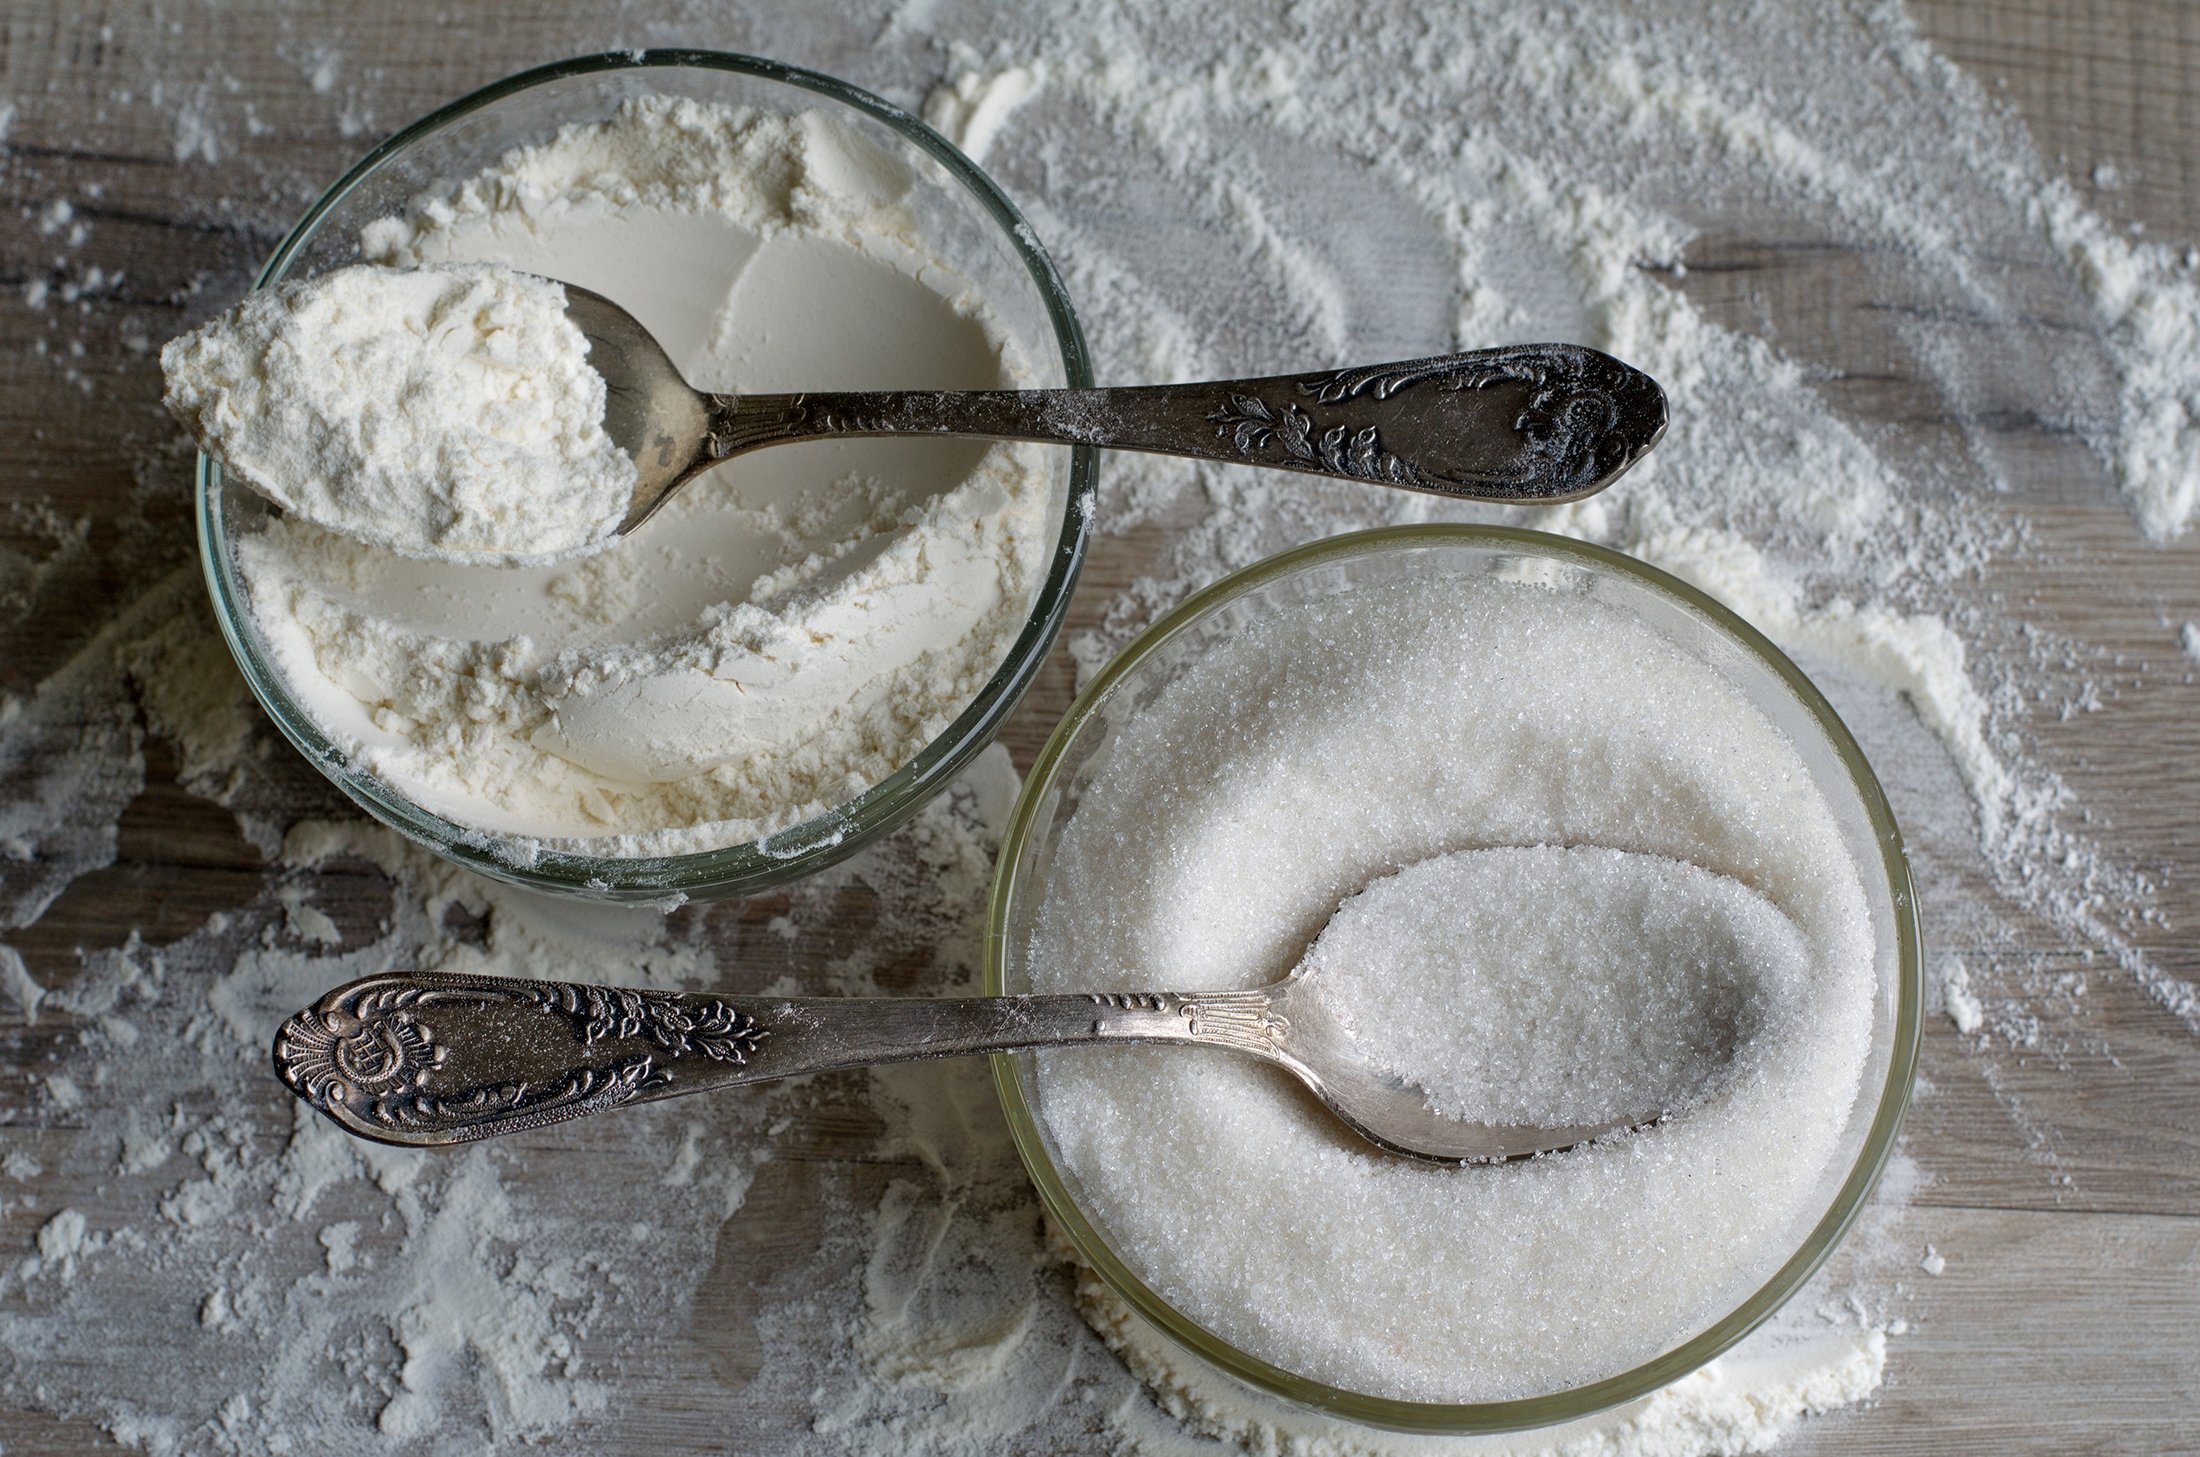 Two silver tablespoons of sugar and flour for cooking a cake. (Shutterstock)